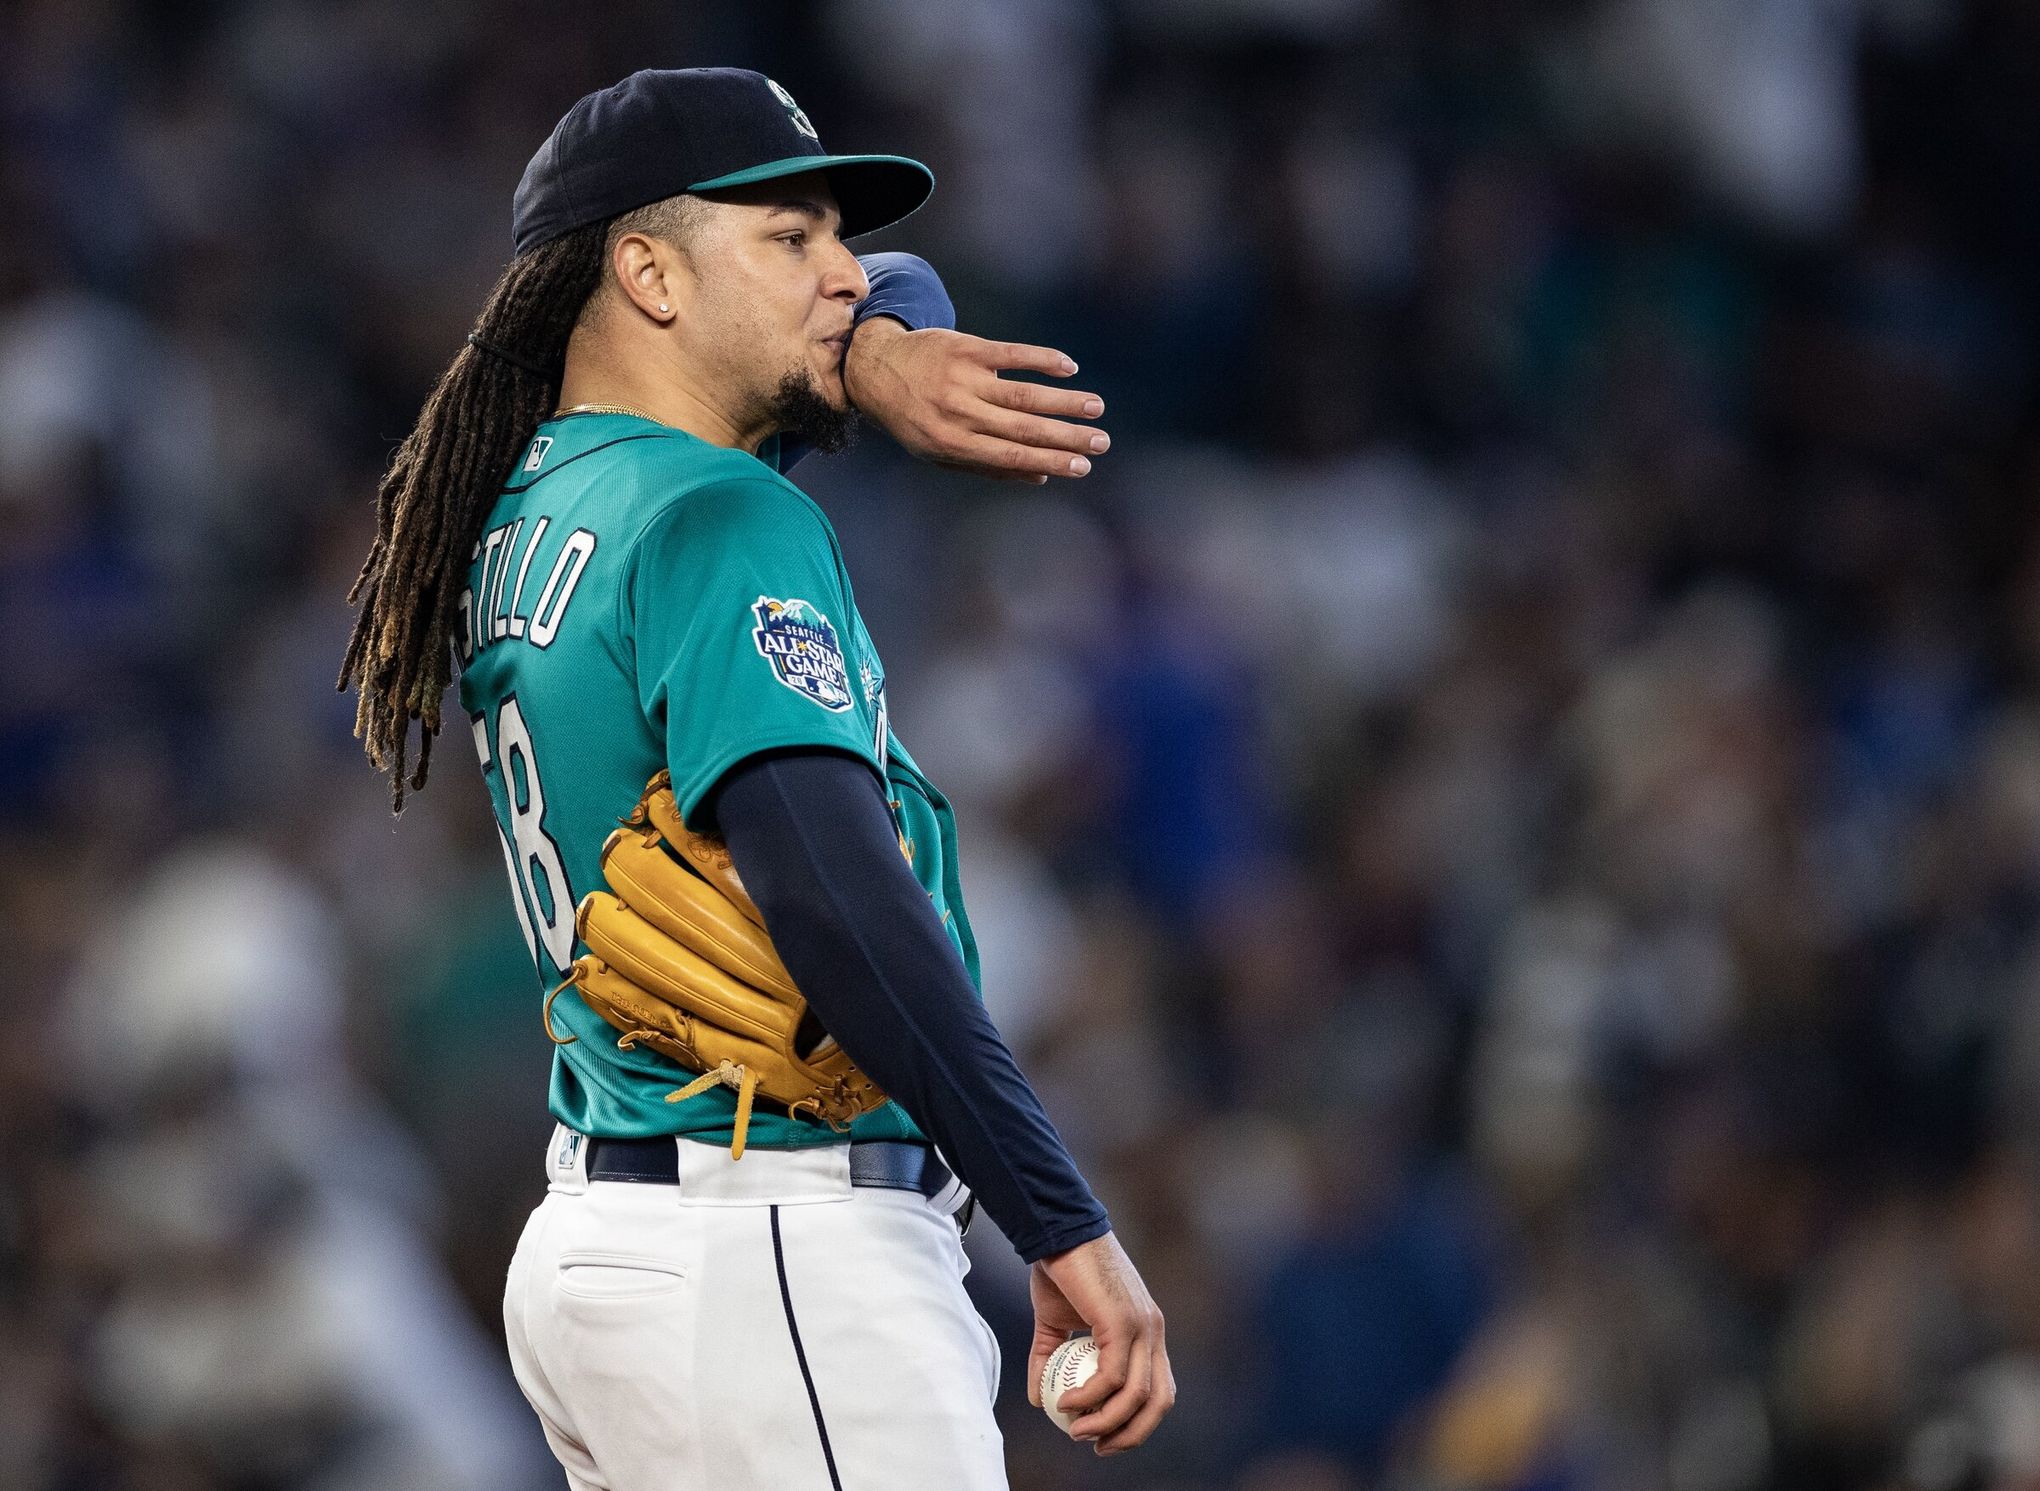 Seattle Mariners - It's '90s Night tonight in Houston and we are